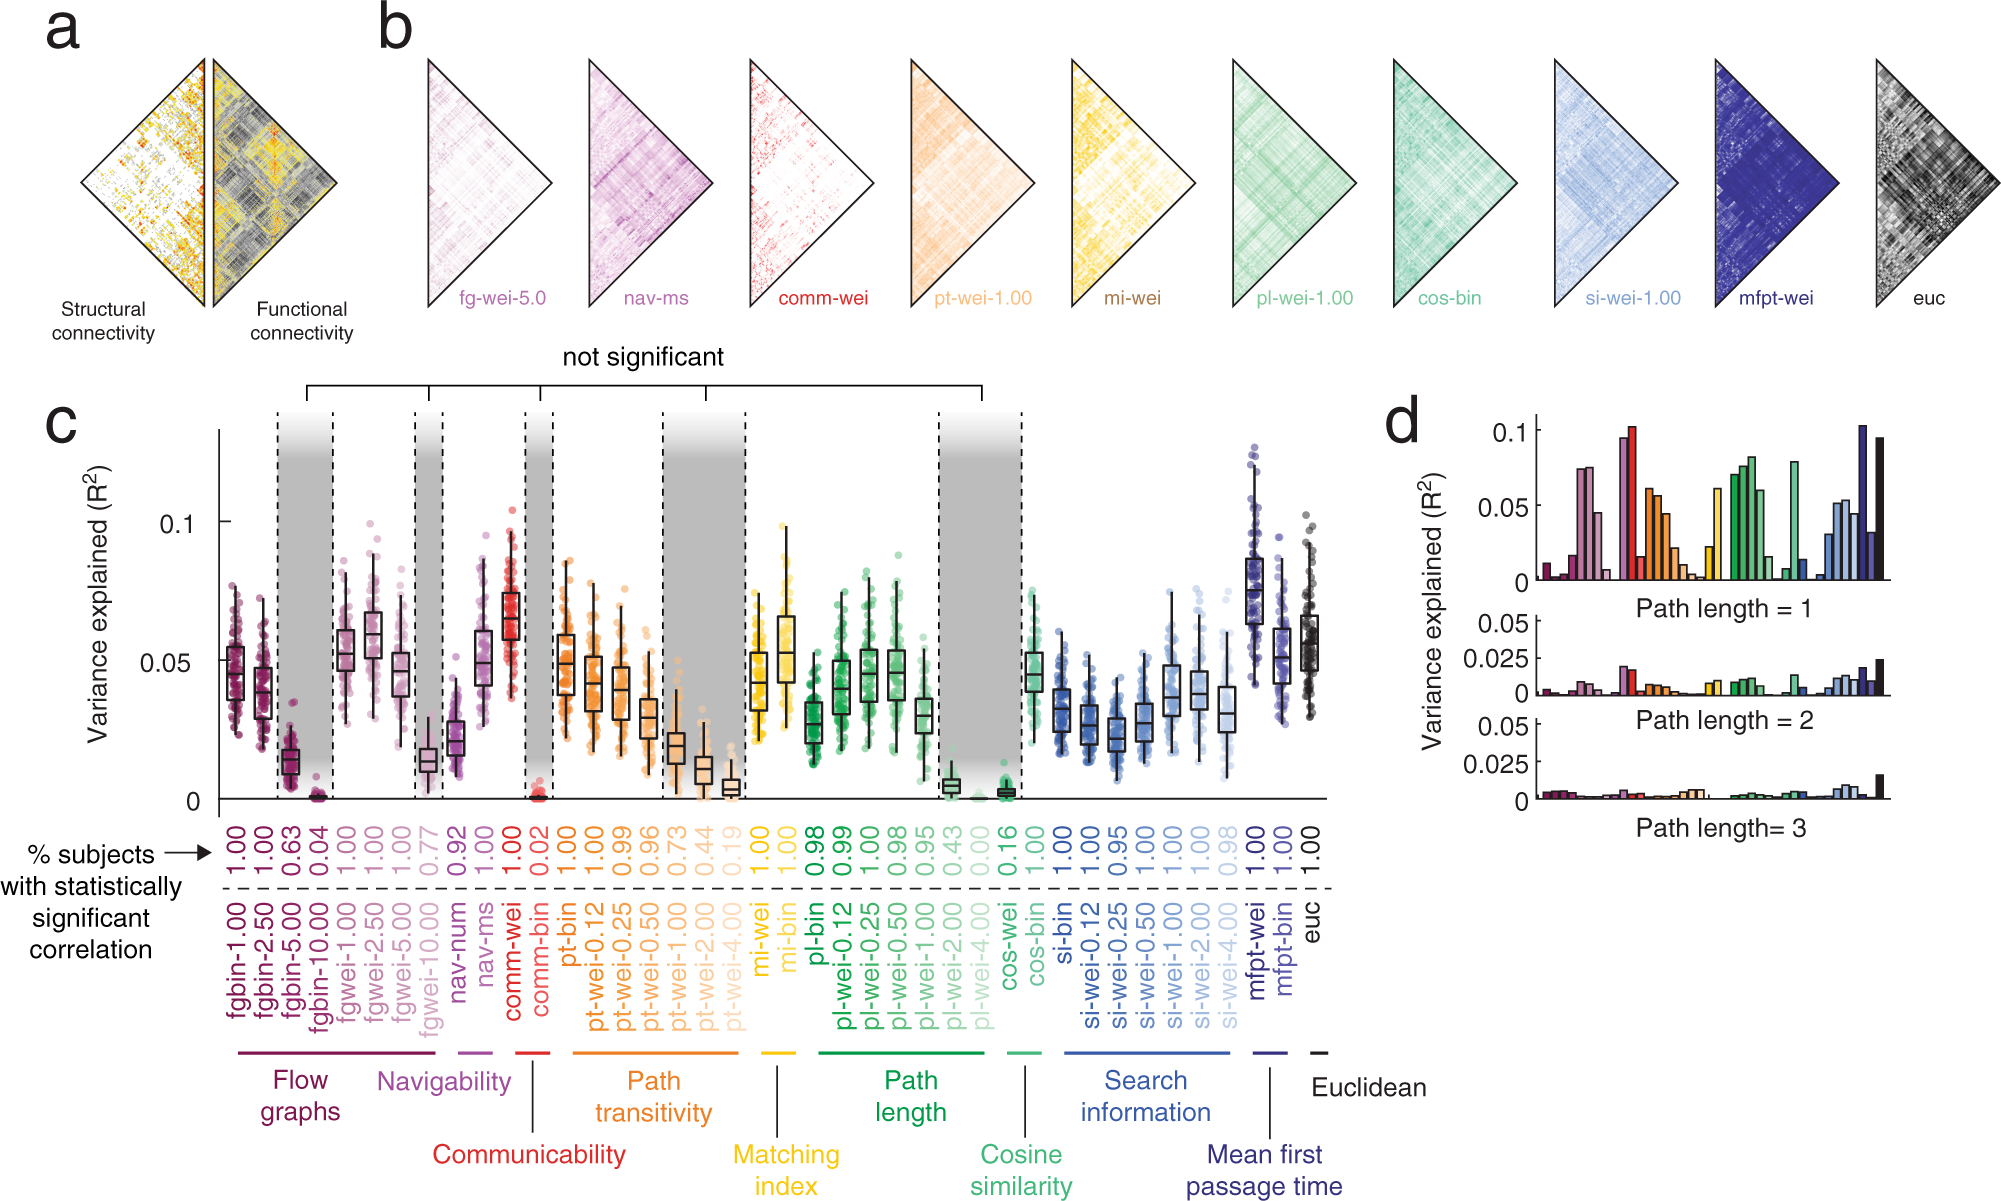 Local structure-function relationships in human brain networks